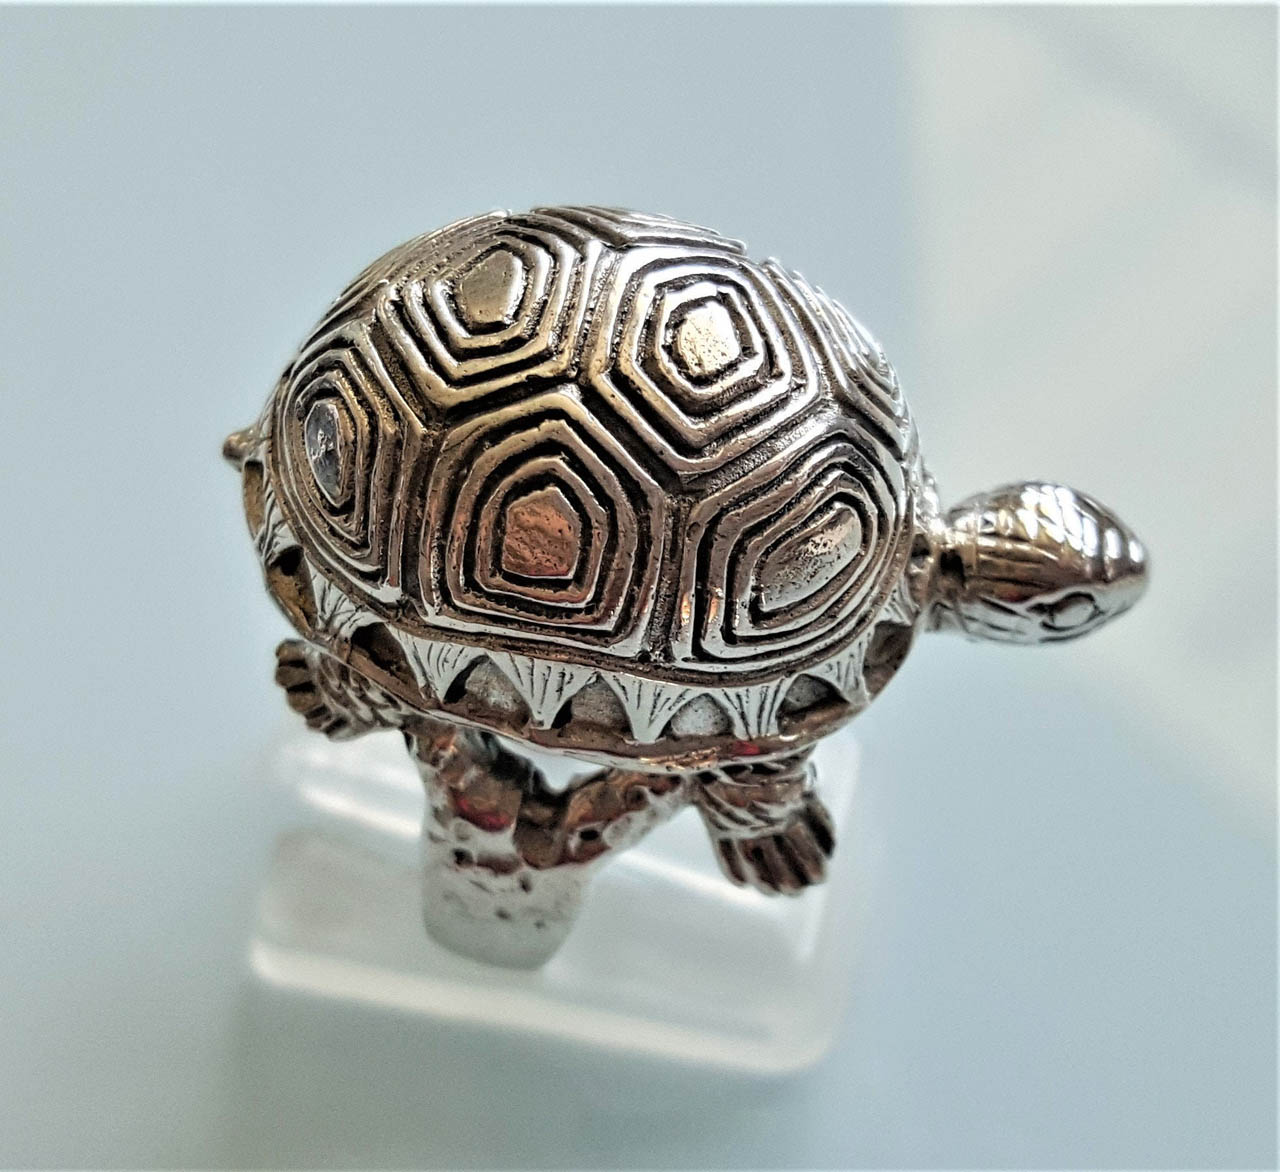 STERLING SILVER 925 Turtle Ring Sea Turtle Ocean Animal Good Luck Gift Totem  Animal Talisman Amulet Heavy 16 grams - ELIZ Jewelry and Gems